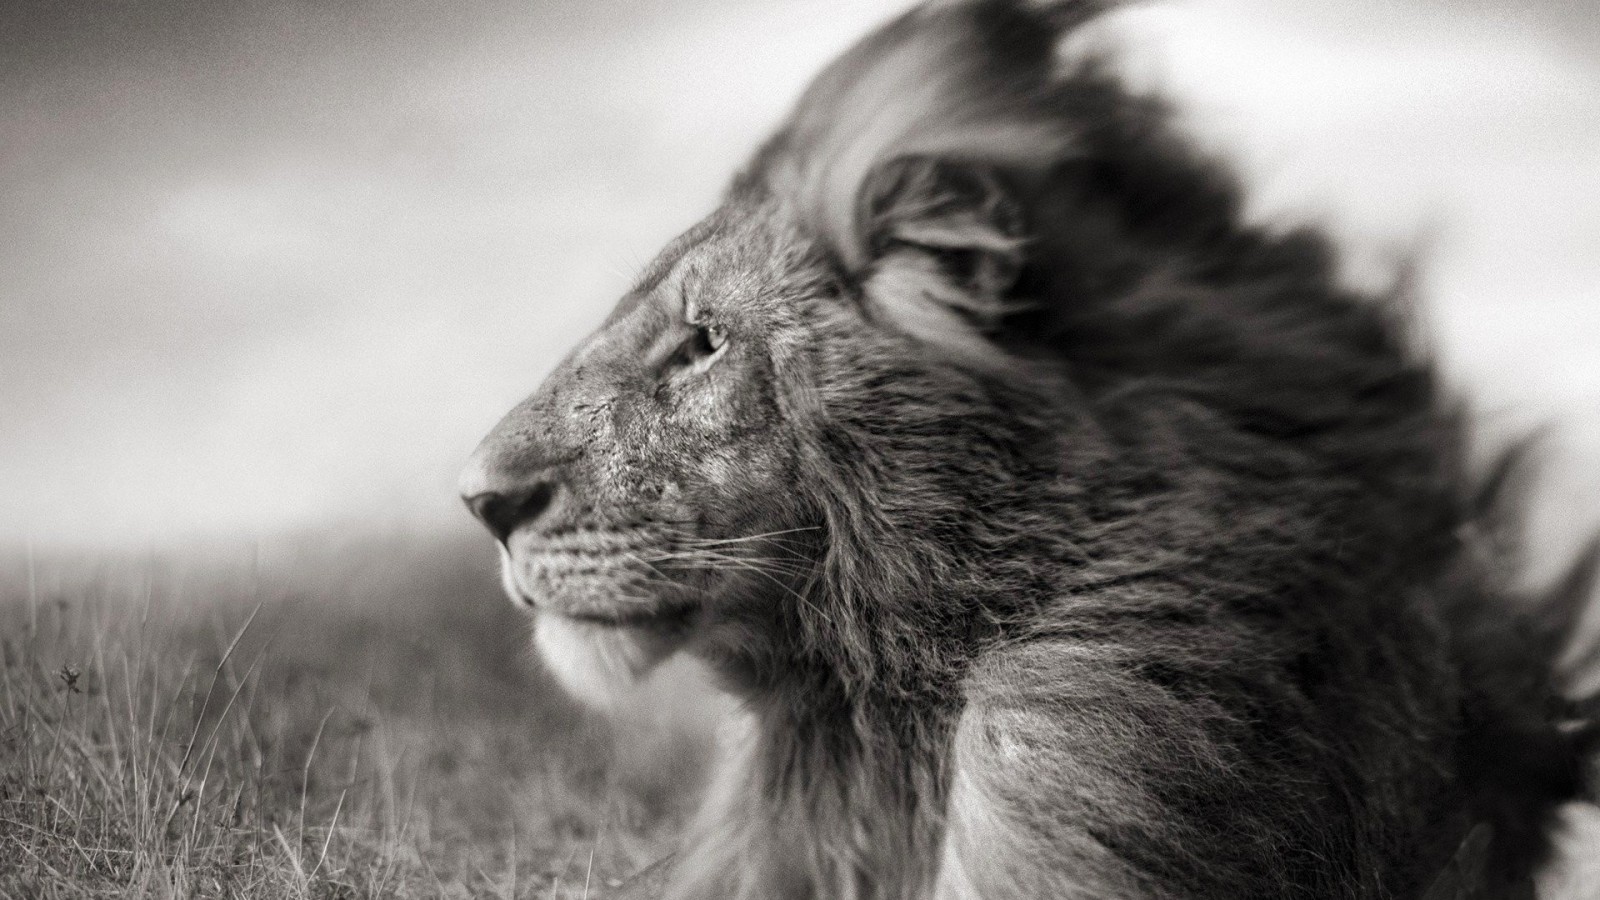 Portrait Of A Lion In Black And White Wallpaper for Desktop 1600x900